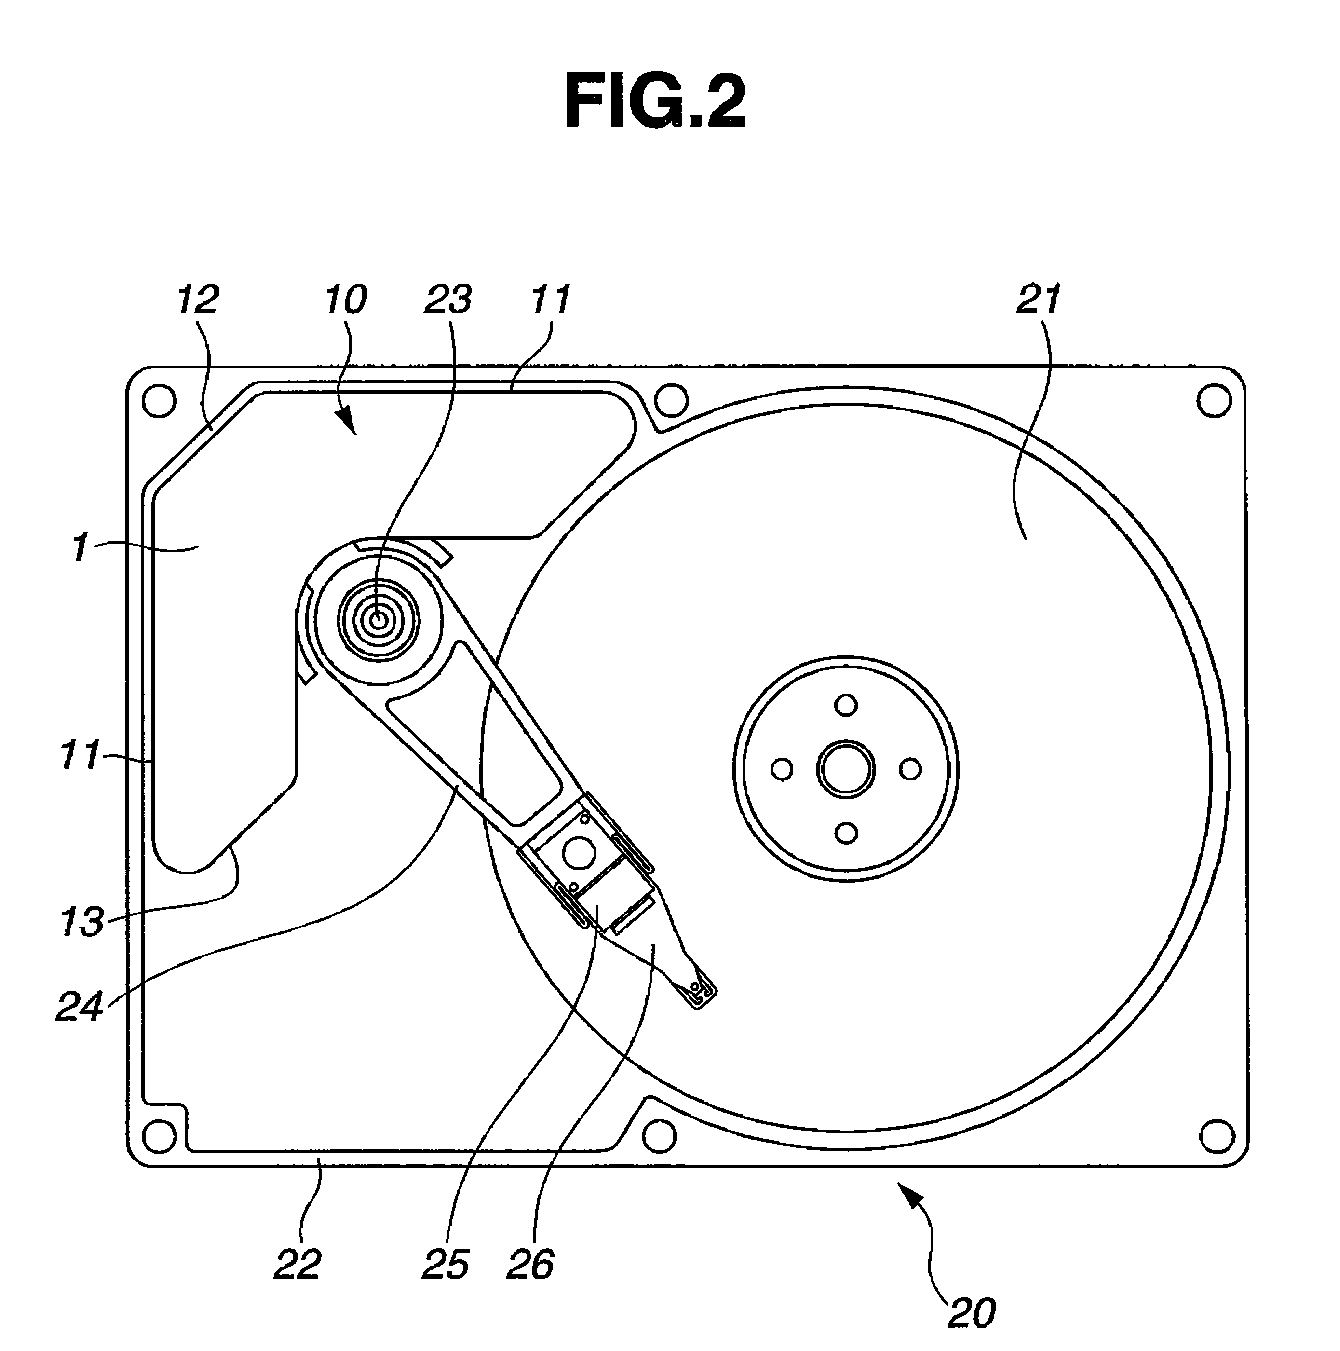 Voice coil motors and magnetic circuits therefor